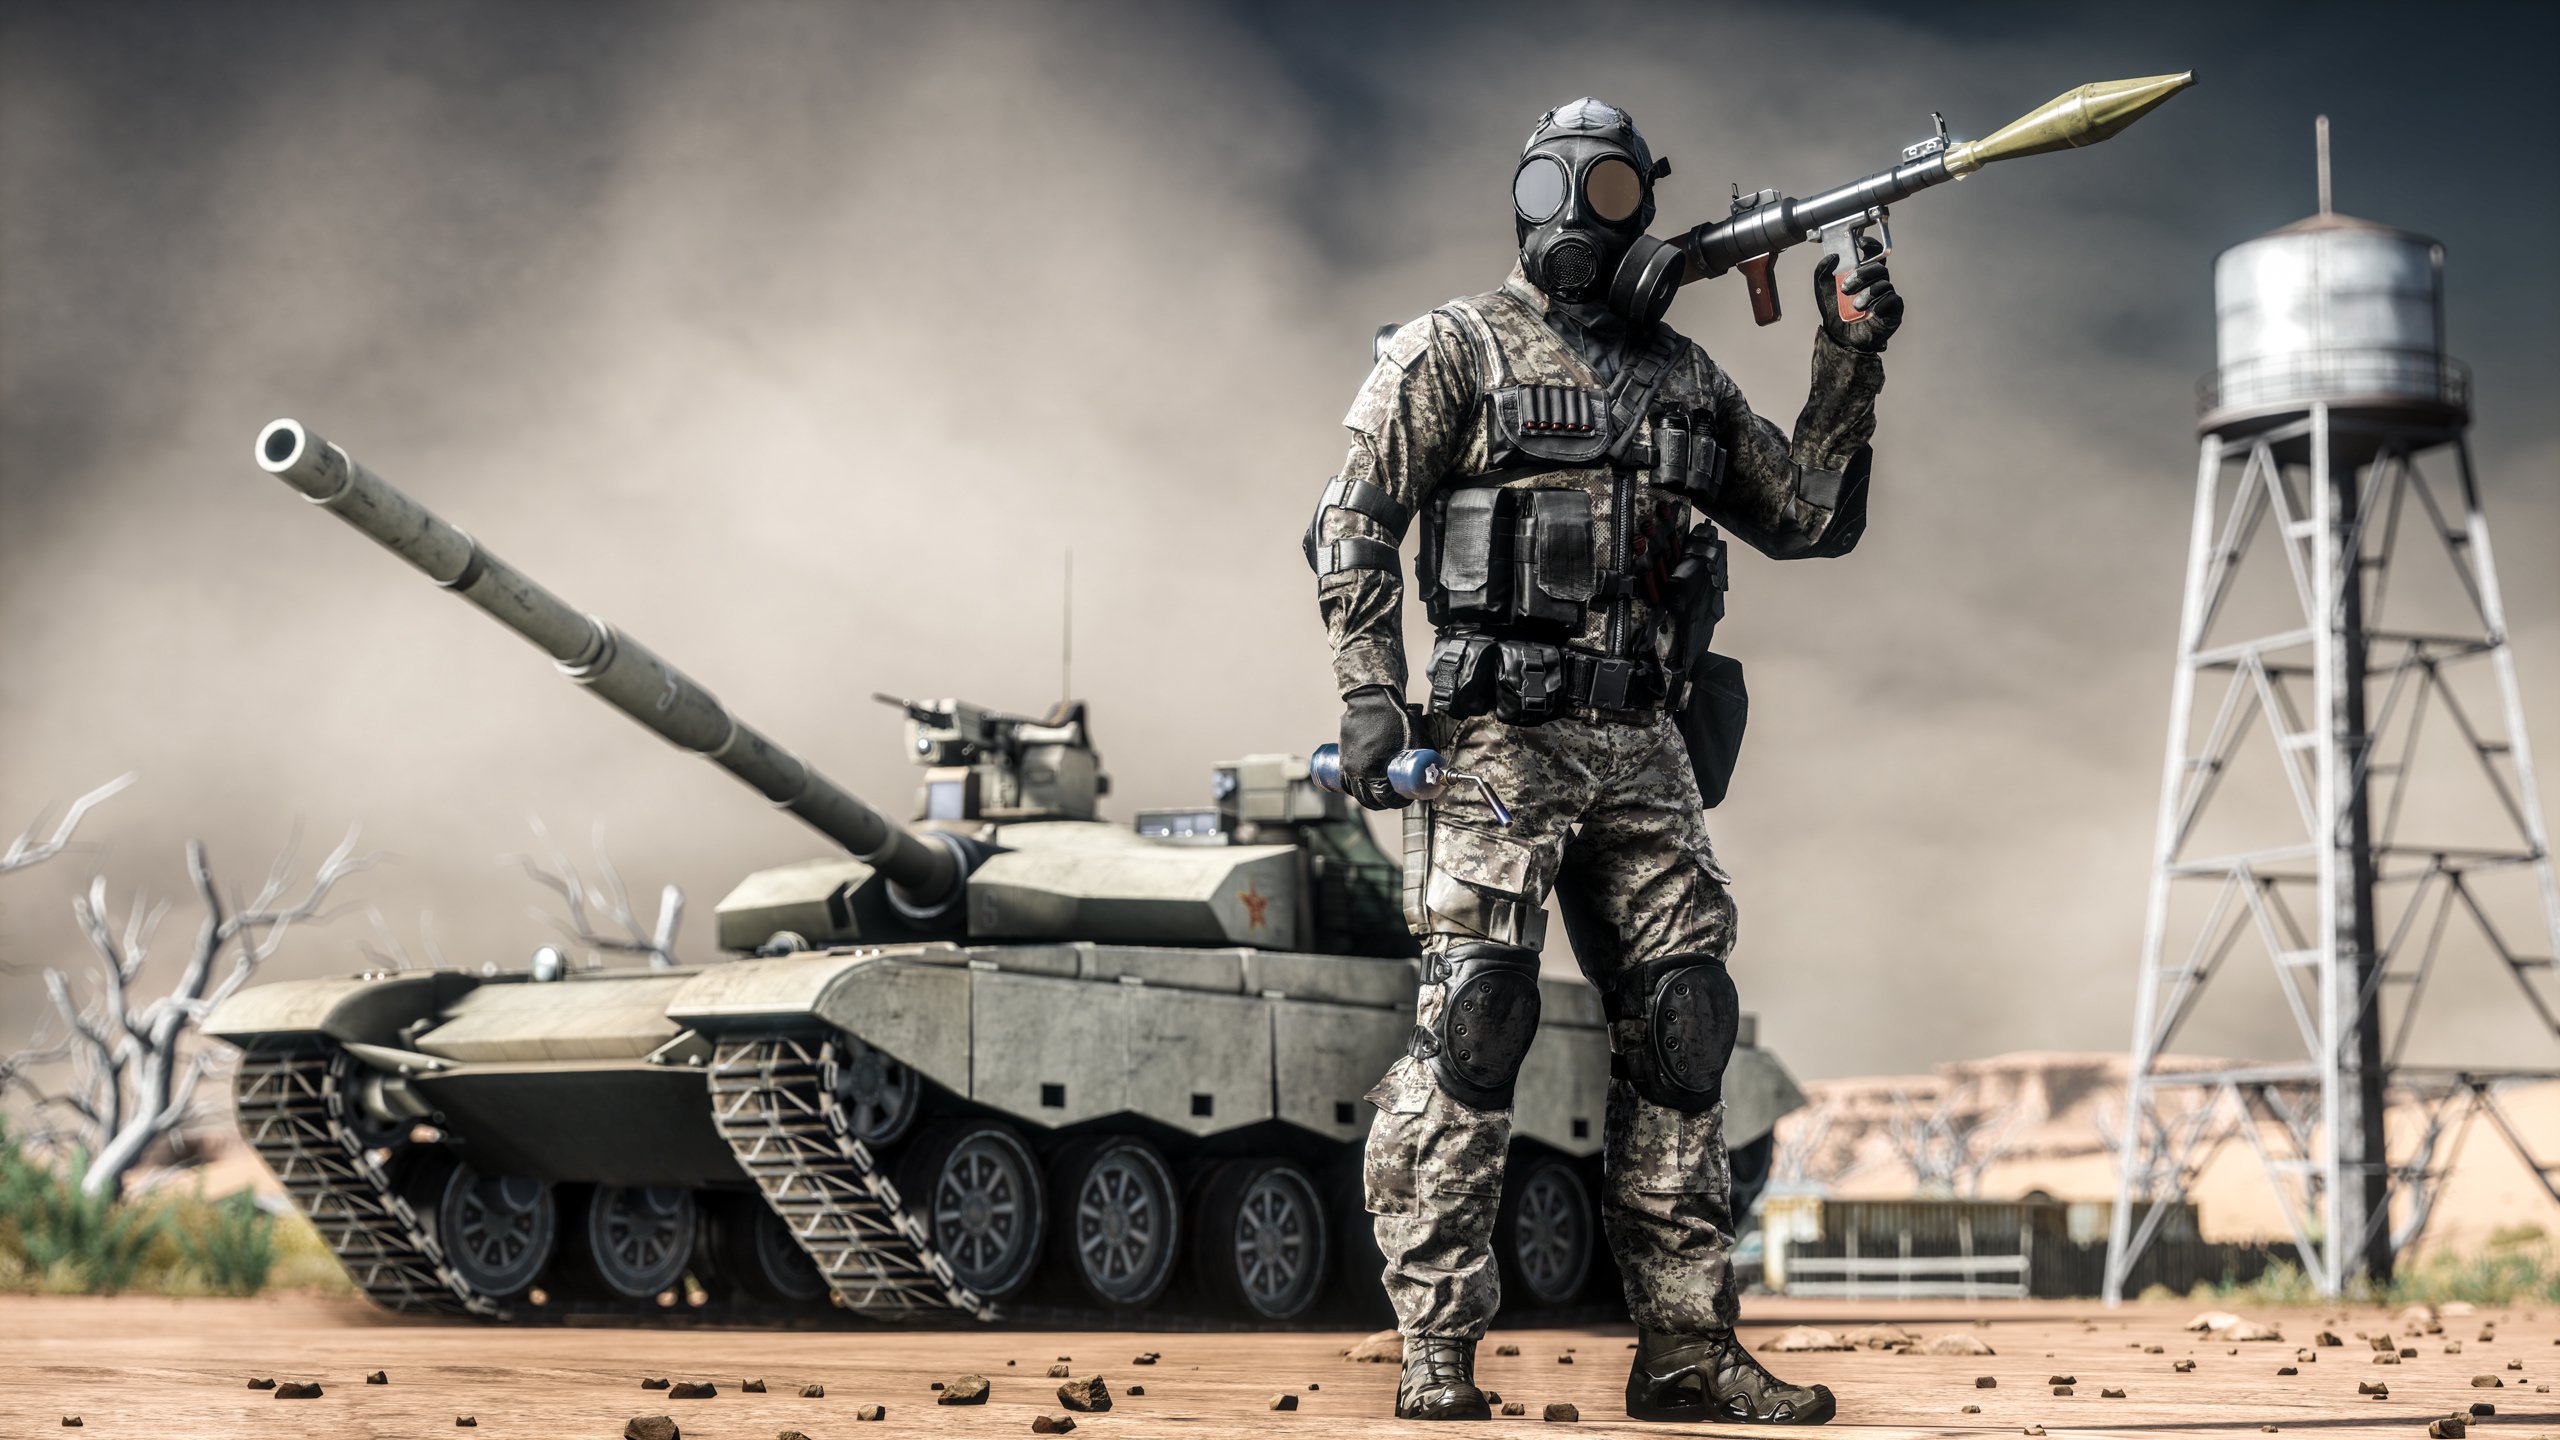 battlefield, Shooter, Tactical, Military, Action, Fighting, Warrior